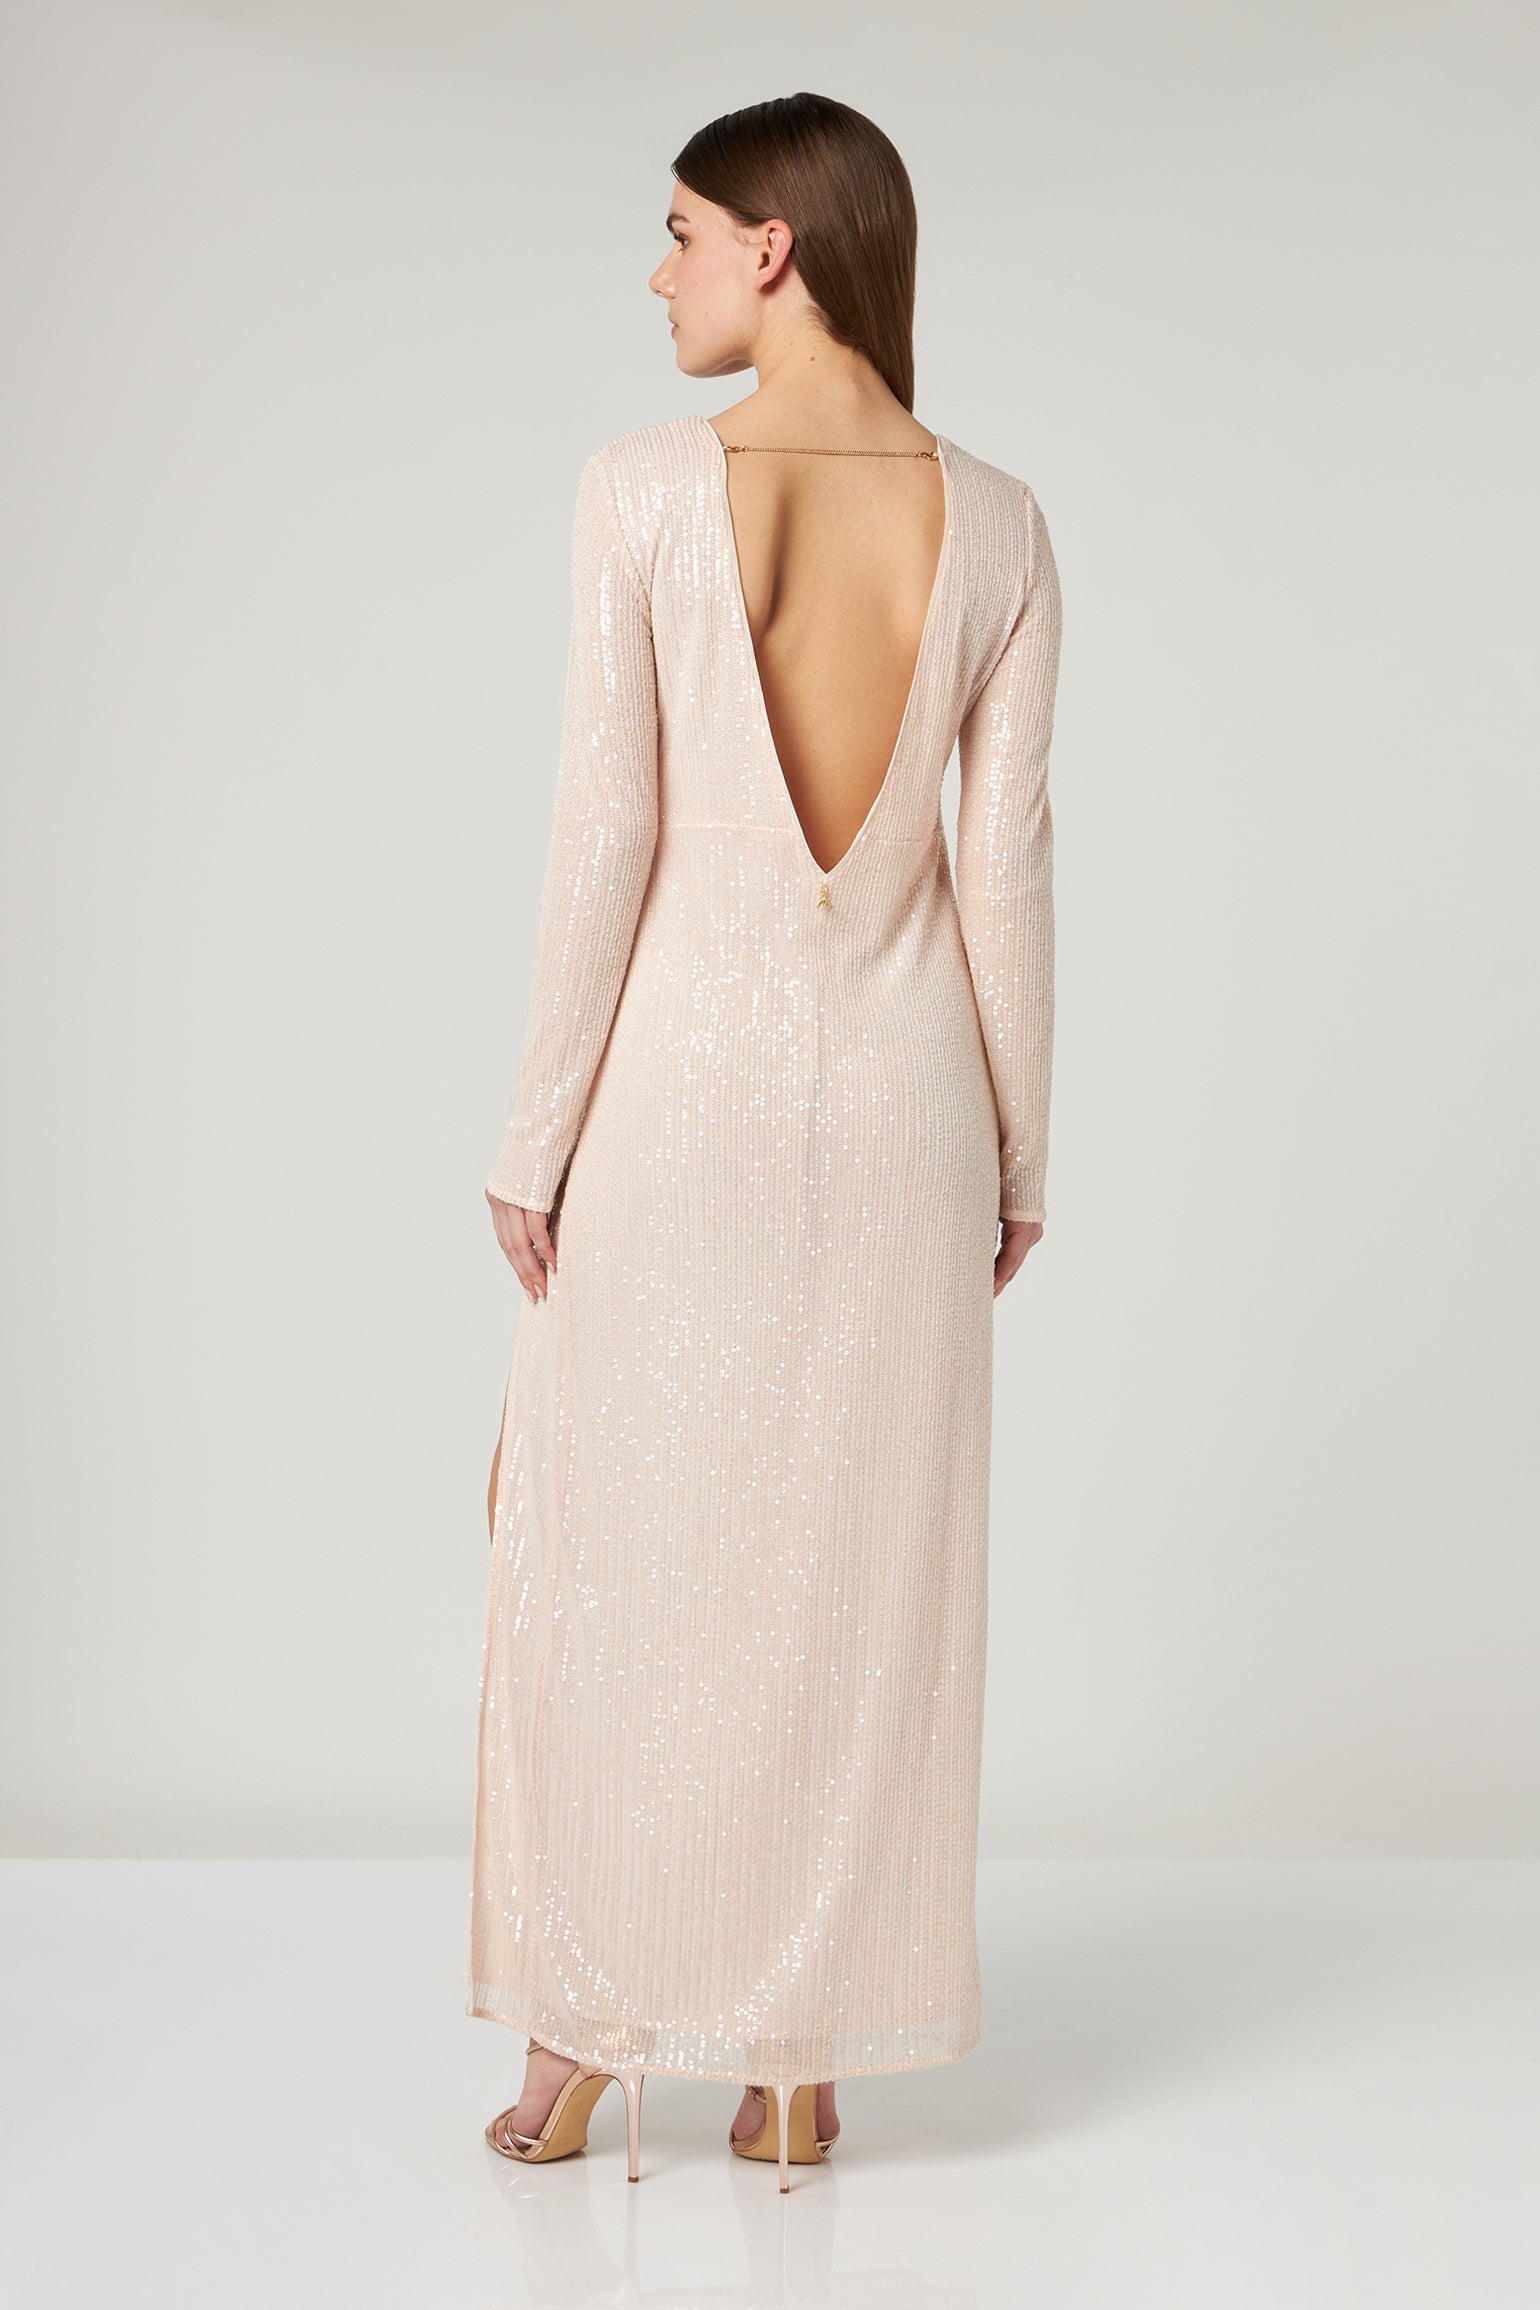 PATRIZIA PEPE Long Dress with Pink Sequins